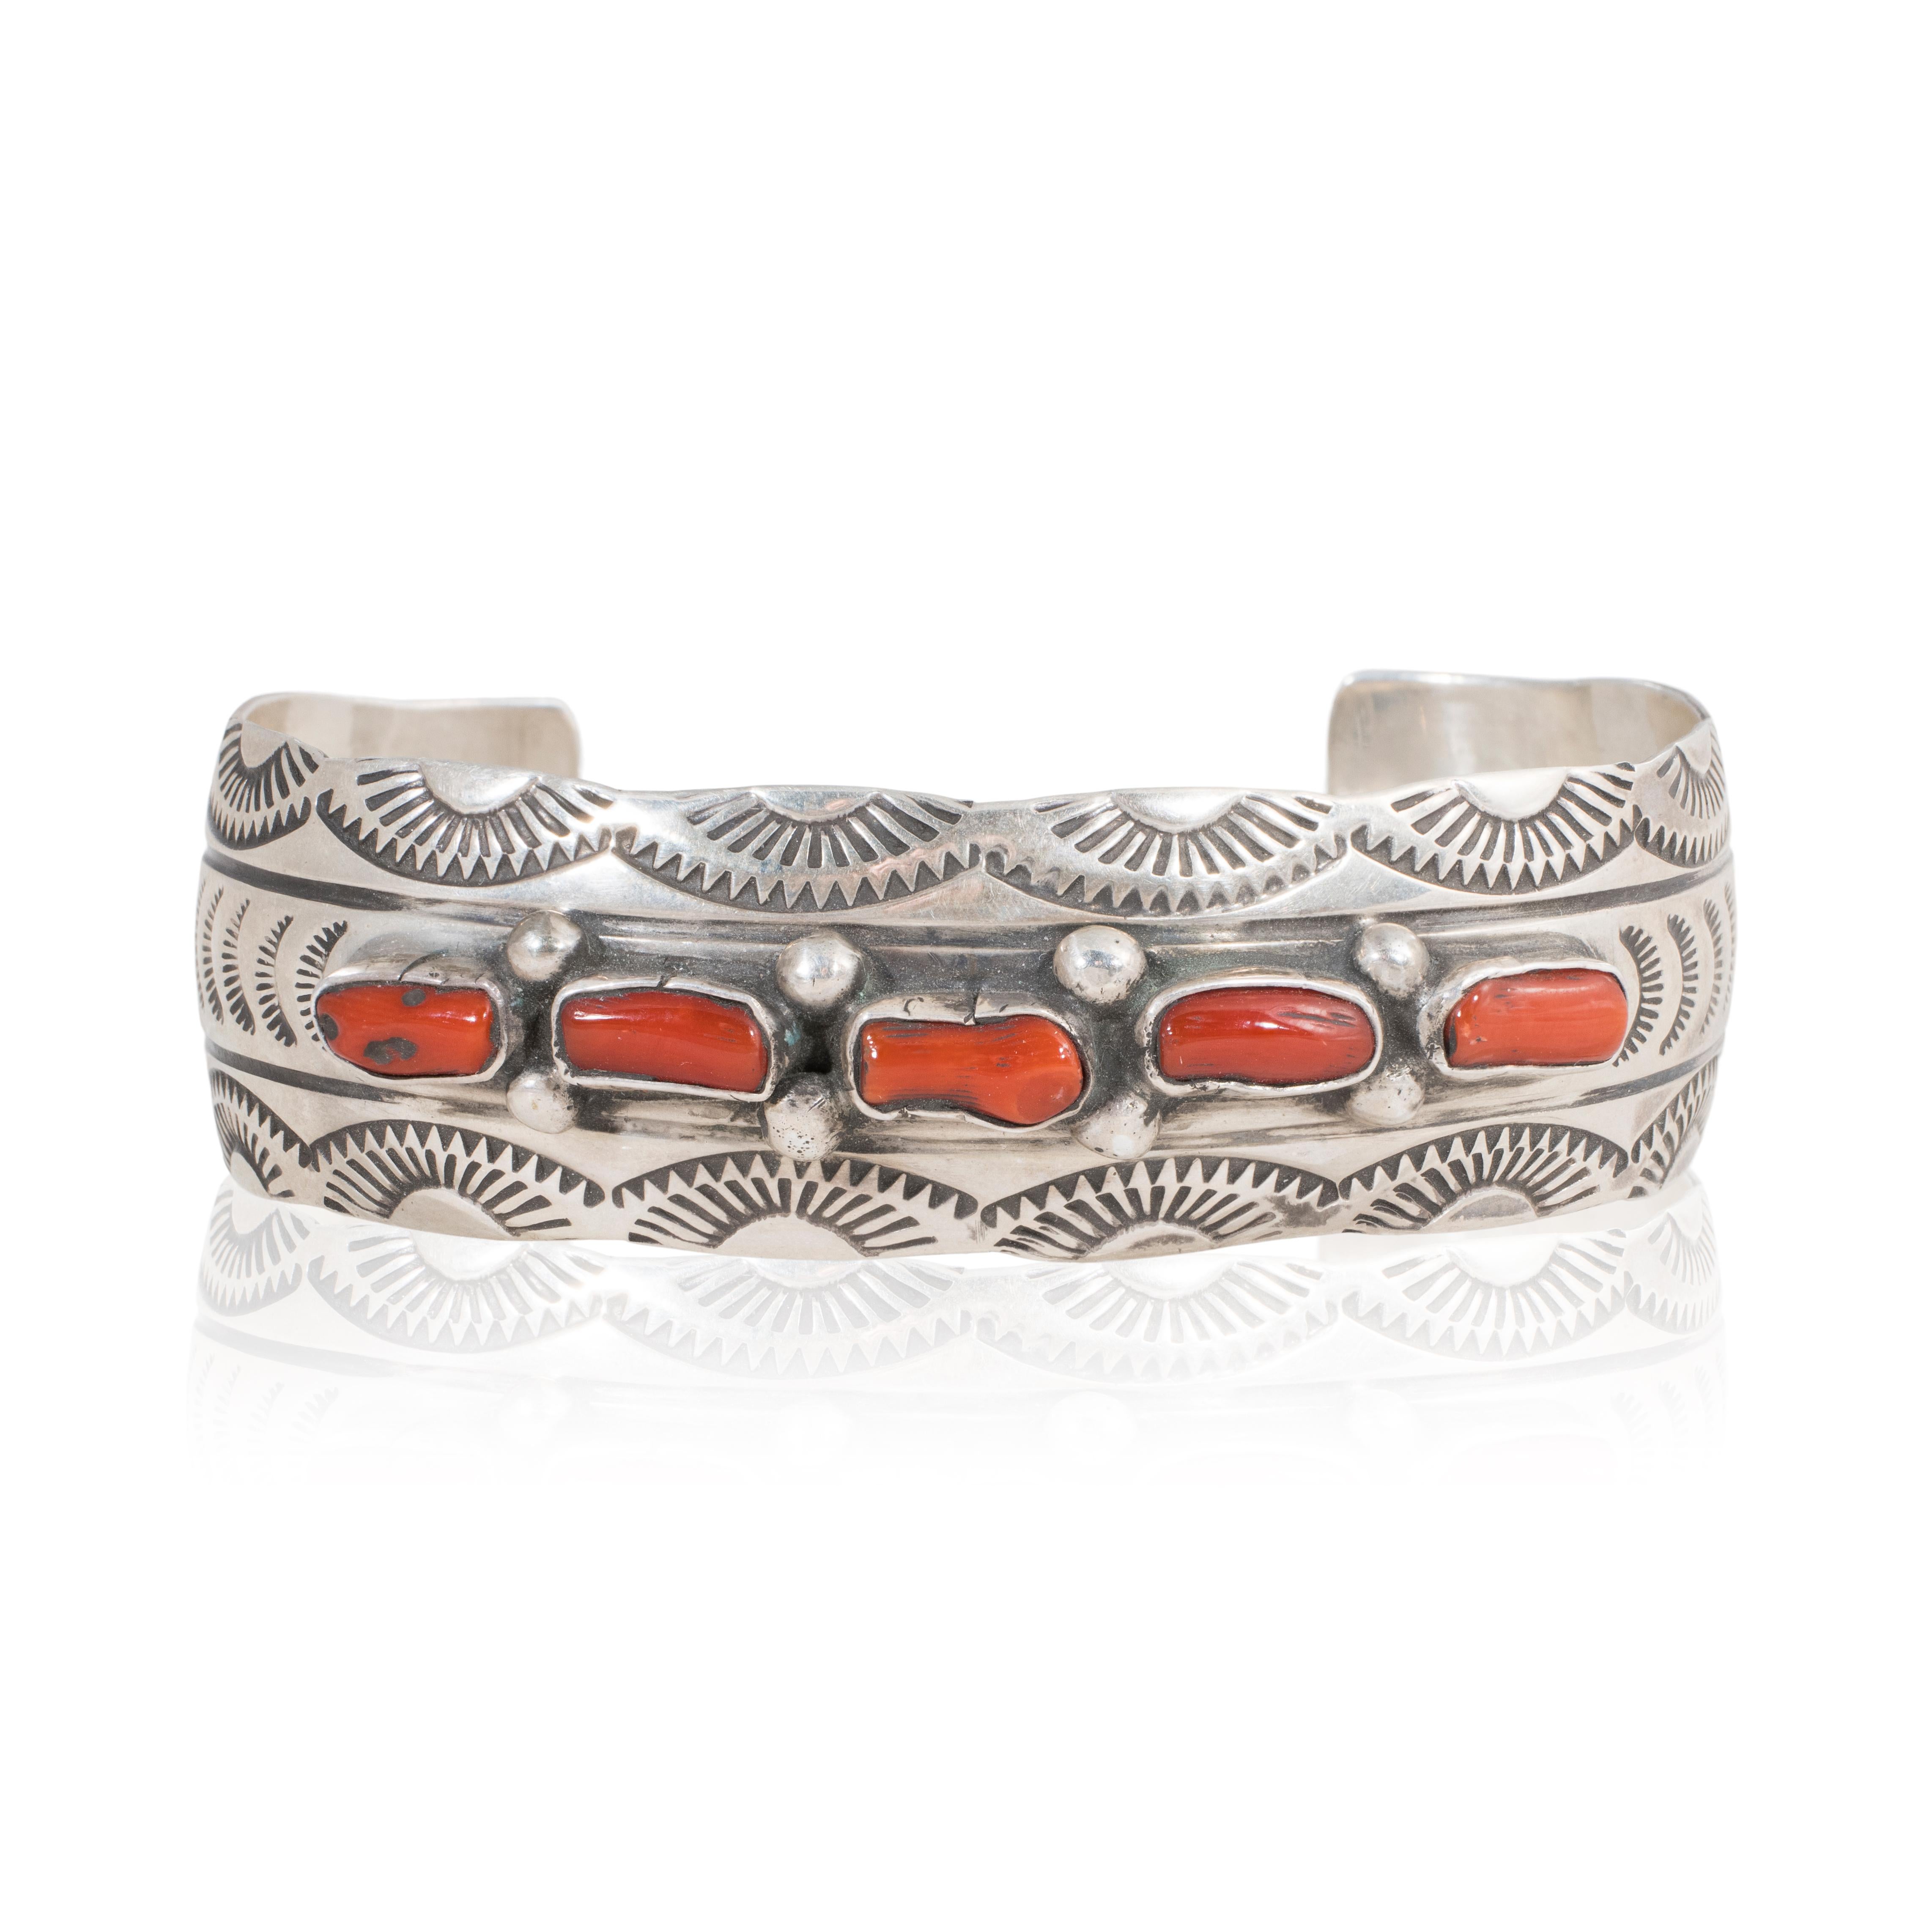 Navajo sterling silver and coral cuff bracelet by J. Lee. This bracelet has five natural coral pieces across the center top portion. The band is completely hand stamped sterling and signed.

PERIOD: Mid 20th Century

ORIGIN: Southwest - Navajo,